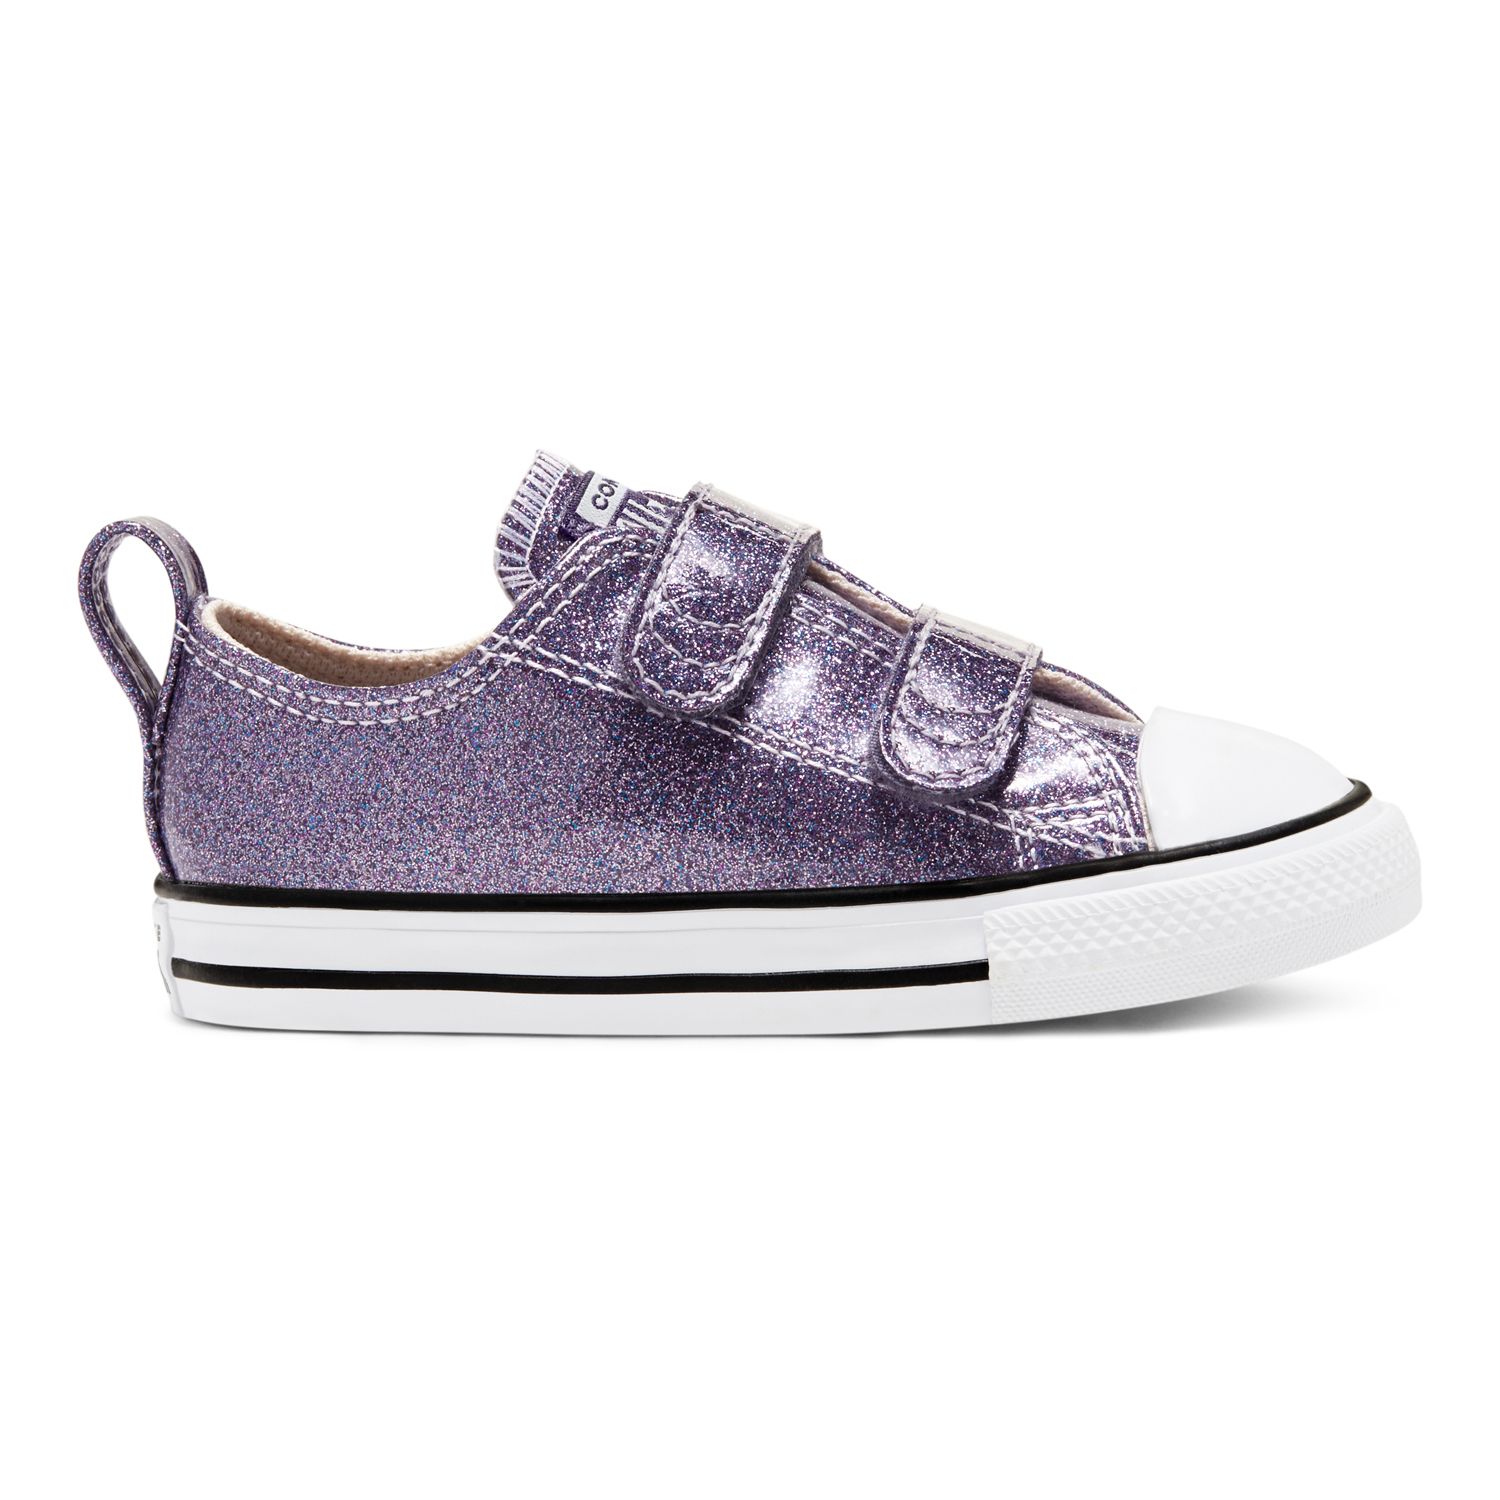 purple chucks for toddlers